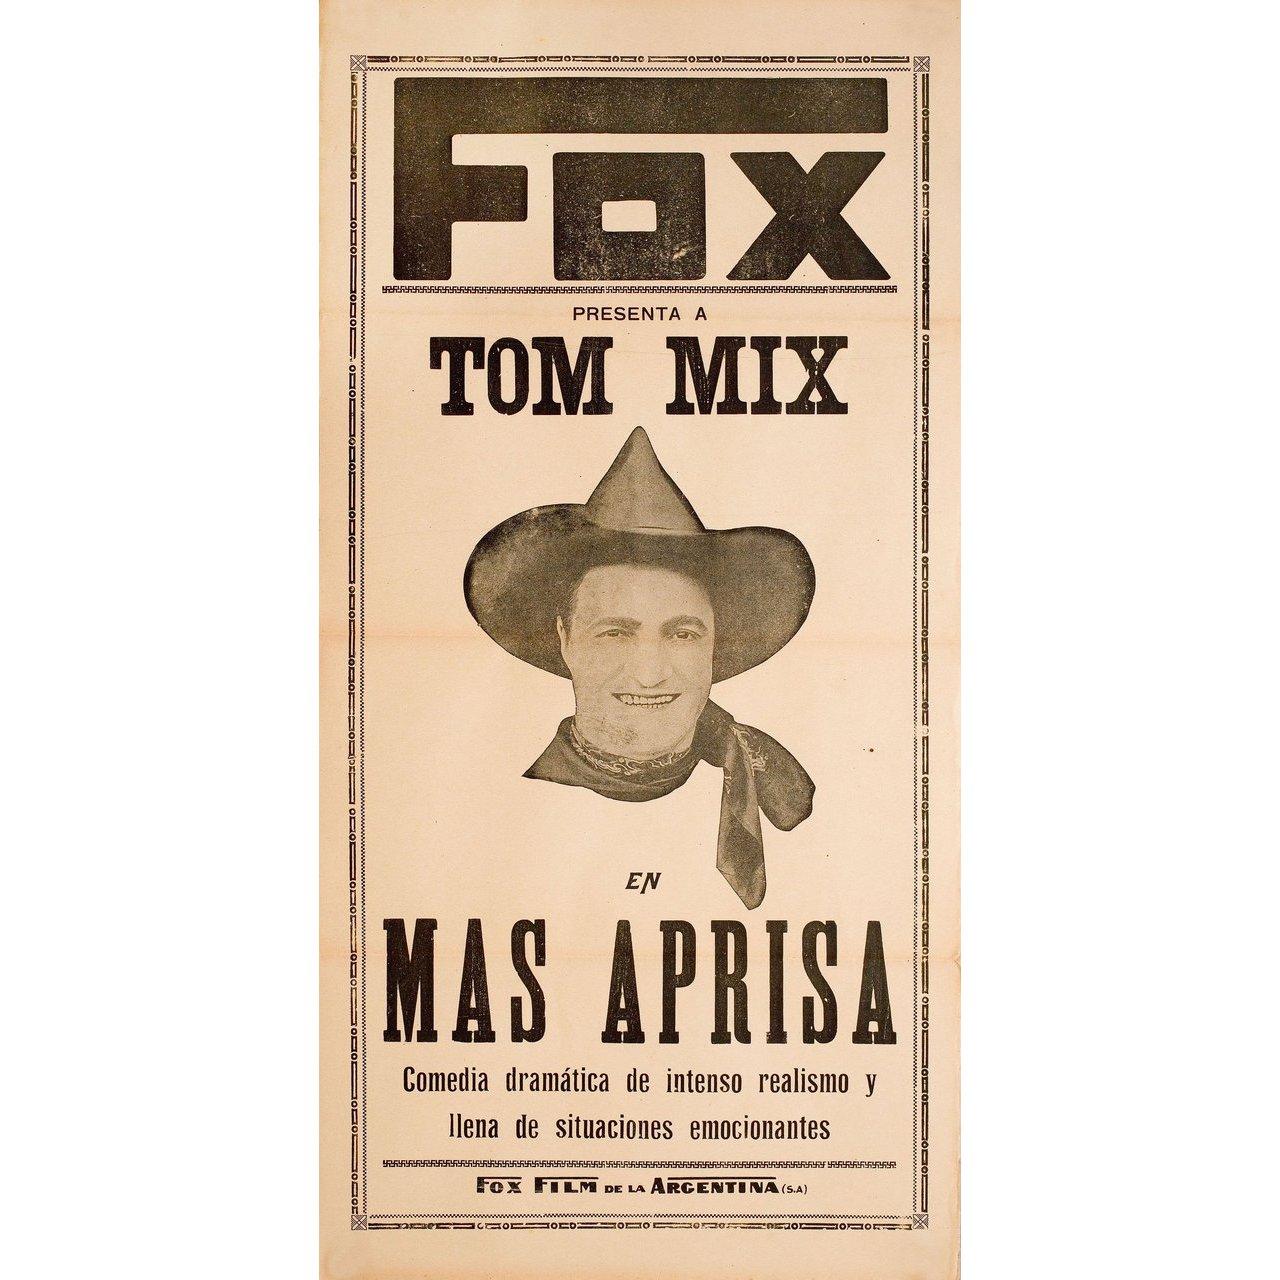 Original 1920s Argentine poster for the film Mas Aprisas with Tom Mix. Very good-fine condition, folded. Many original posters were issued folded or were subsequently folded. Please note: the size is stated in inches and the actual size can vary by